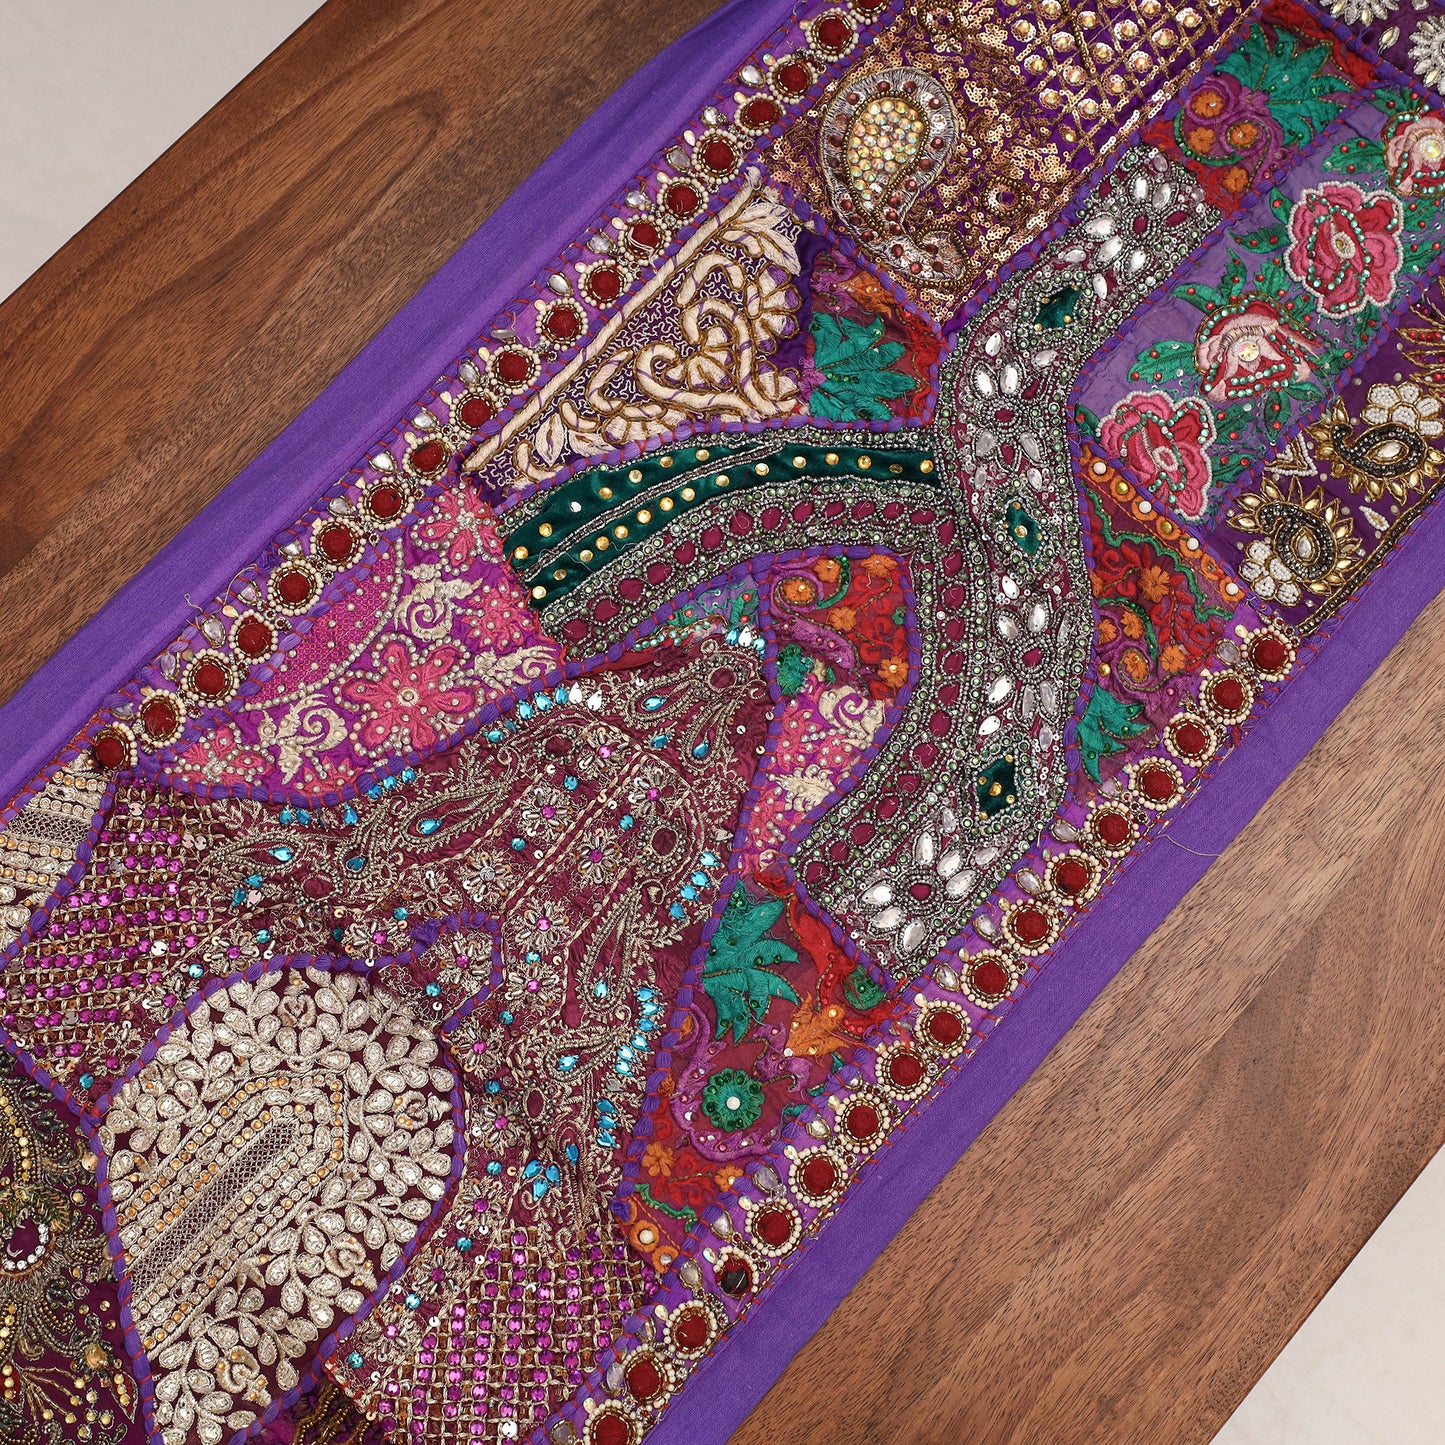 Banjara Vintage Embroidery Table Runner (60 x 18 in)